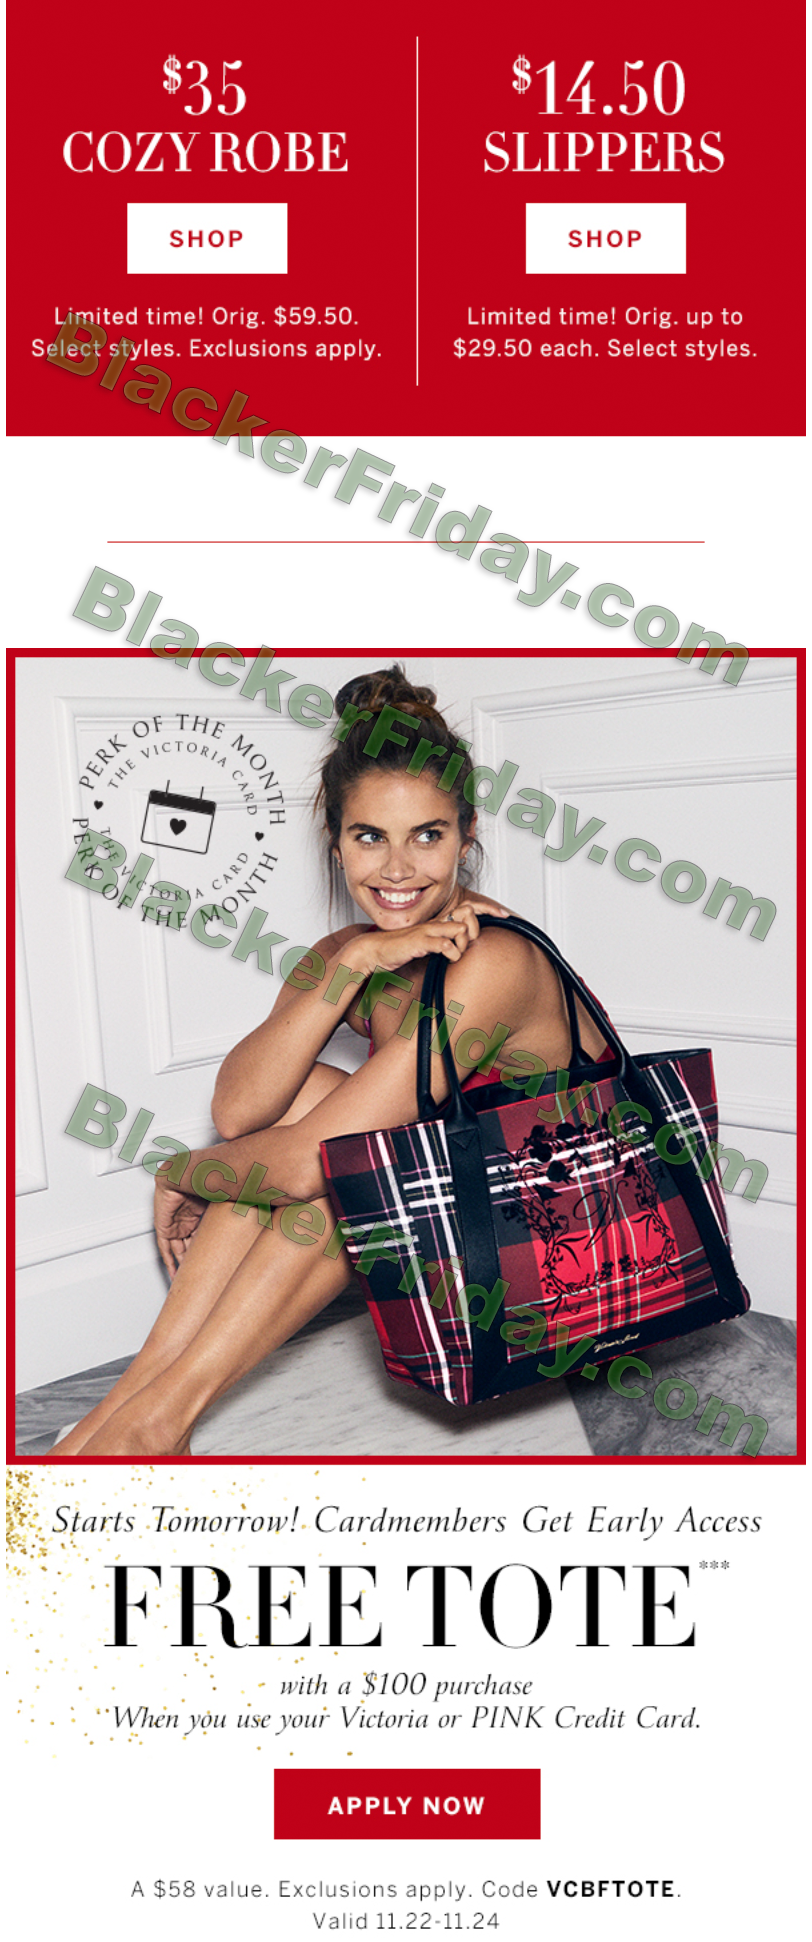 Victoria's Secret - Black Friday is SO ON: get a FREE tote when